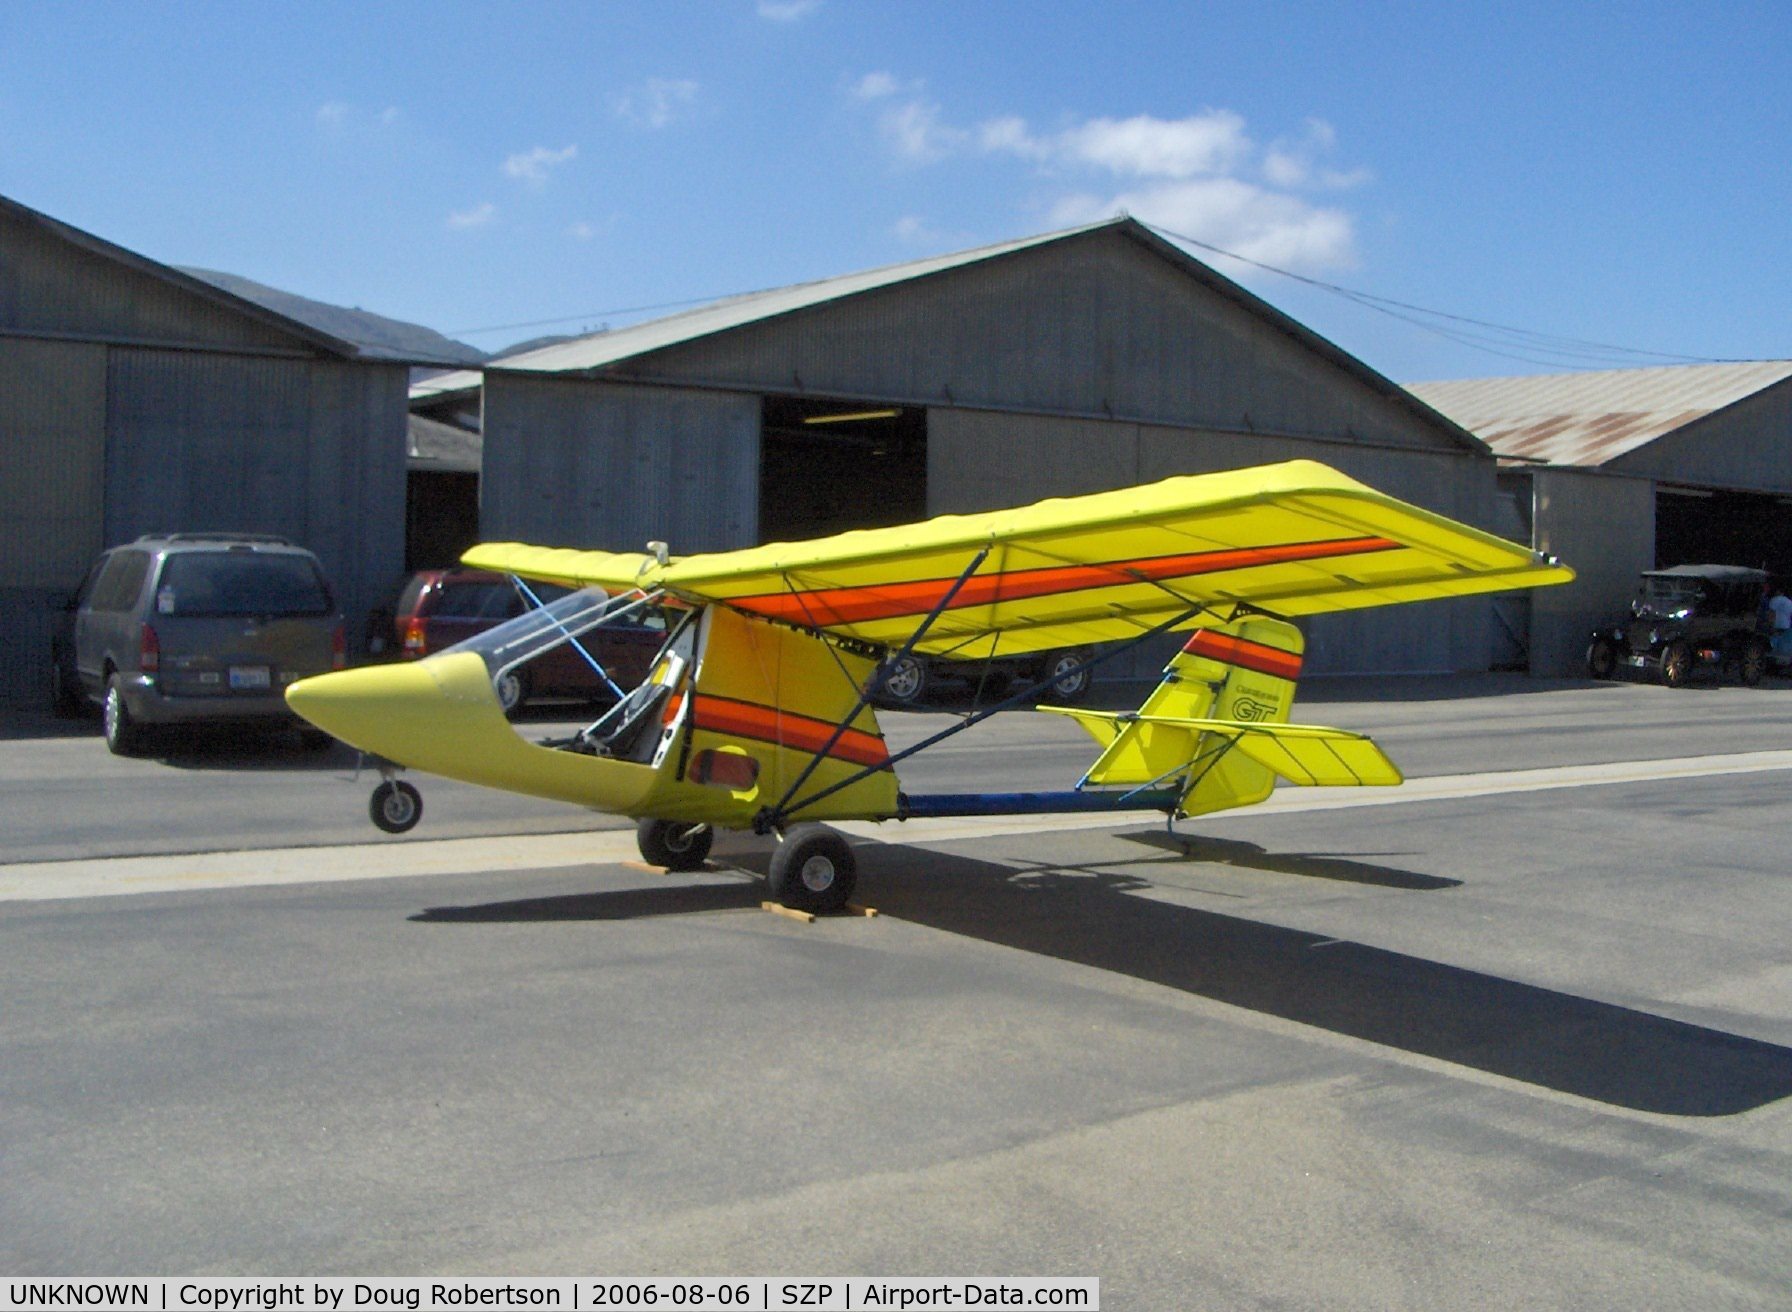 UNKNOWN, Ultralights various C/N Unknown, QUICKSILVER GT 400 Ultralight